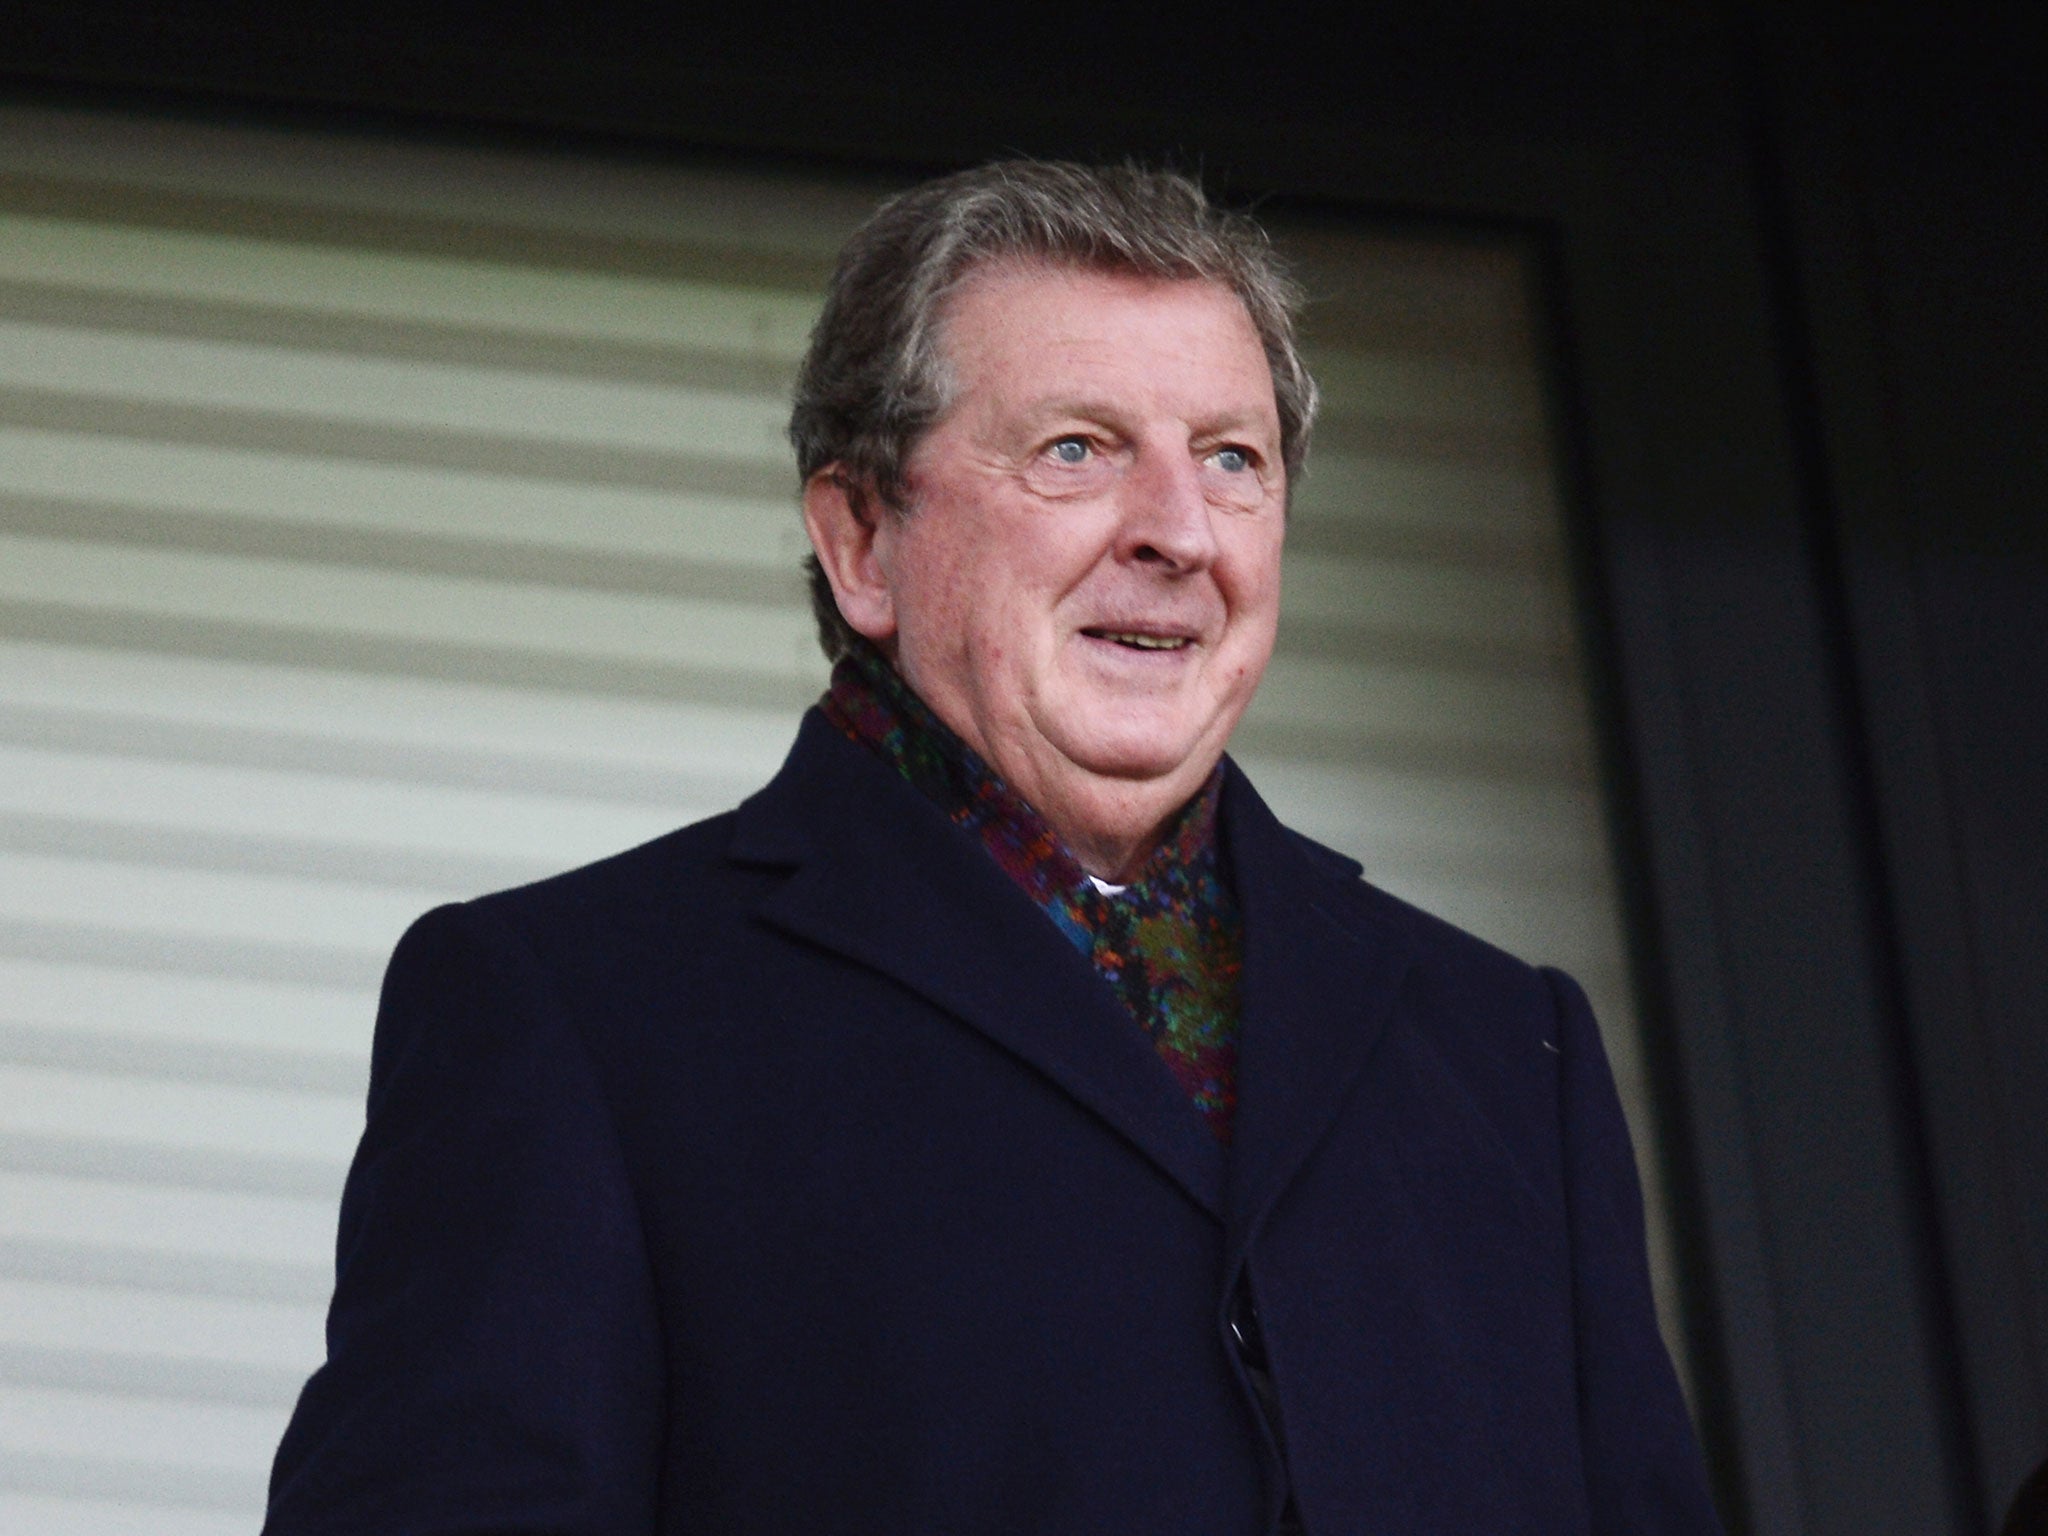 Roy Hodgson is said to have a 'nasty side to him too' according to his assistant manager Ray Lewington